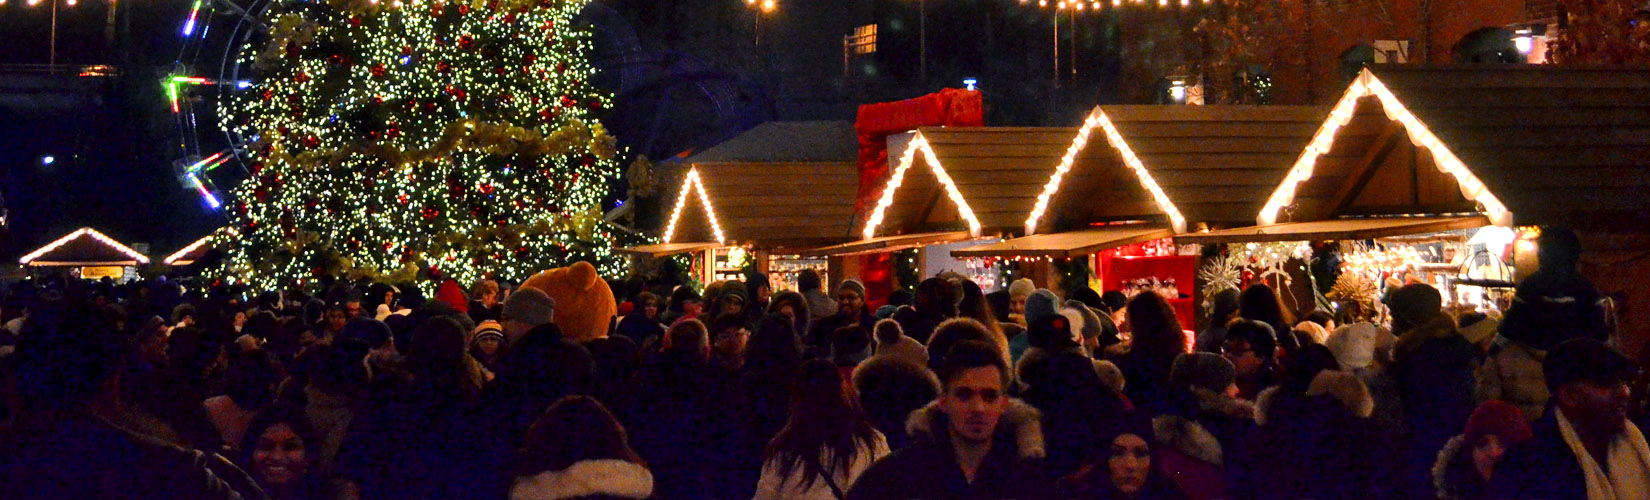 Ontario Christmas Markets Yule Absolutely Adore I Ve Been Bit A Travel Blog